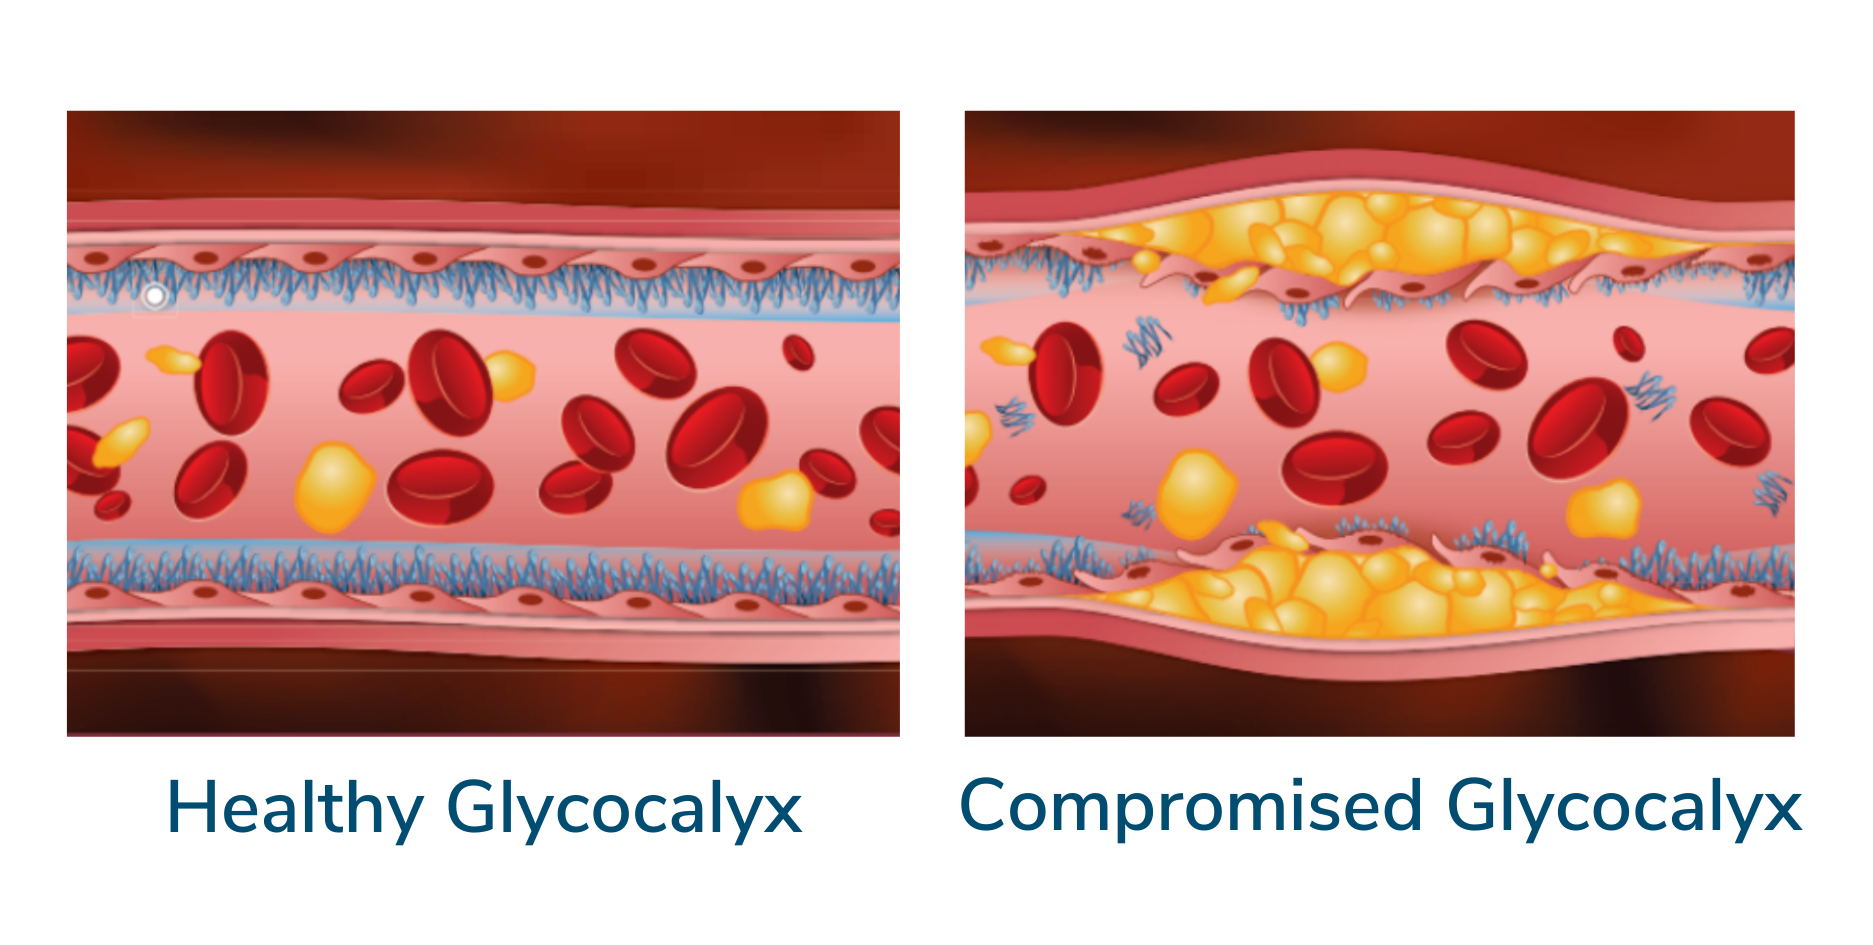 A healthy artery and its wall compared to a compromised artery with plaque buildup and glycocalyx degradation